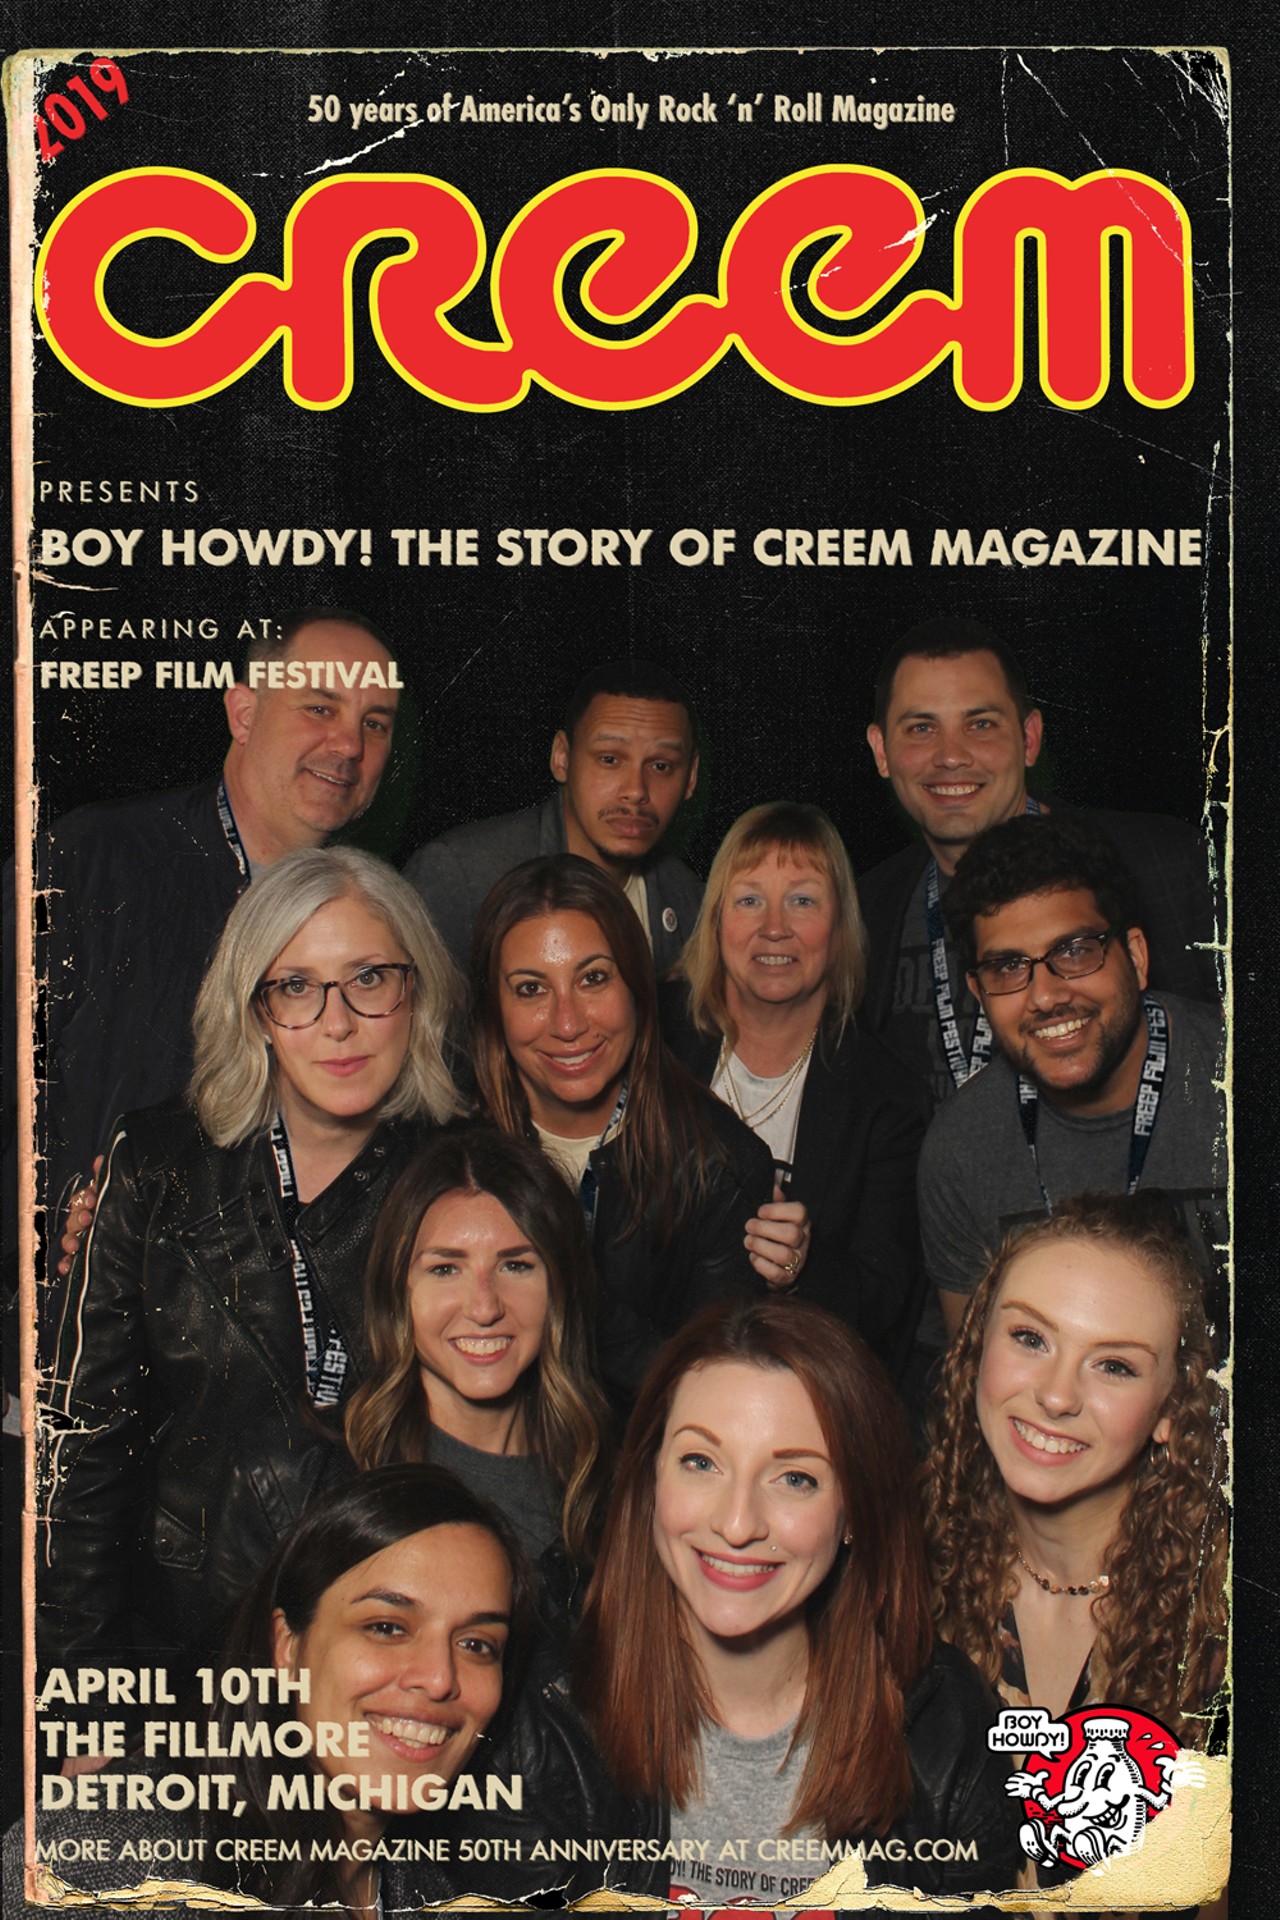 'Creem' doc premiere let attendees be on the cover of 'America's Only Rock 'n' Roll Magazine'